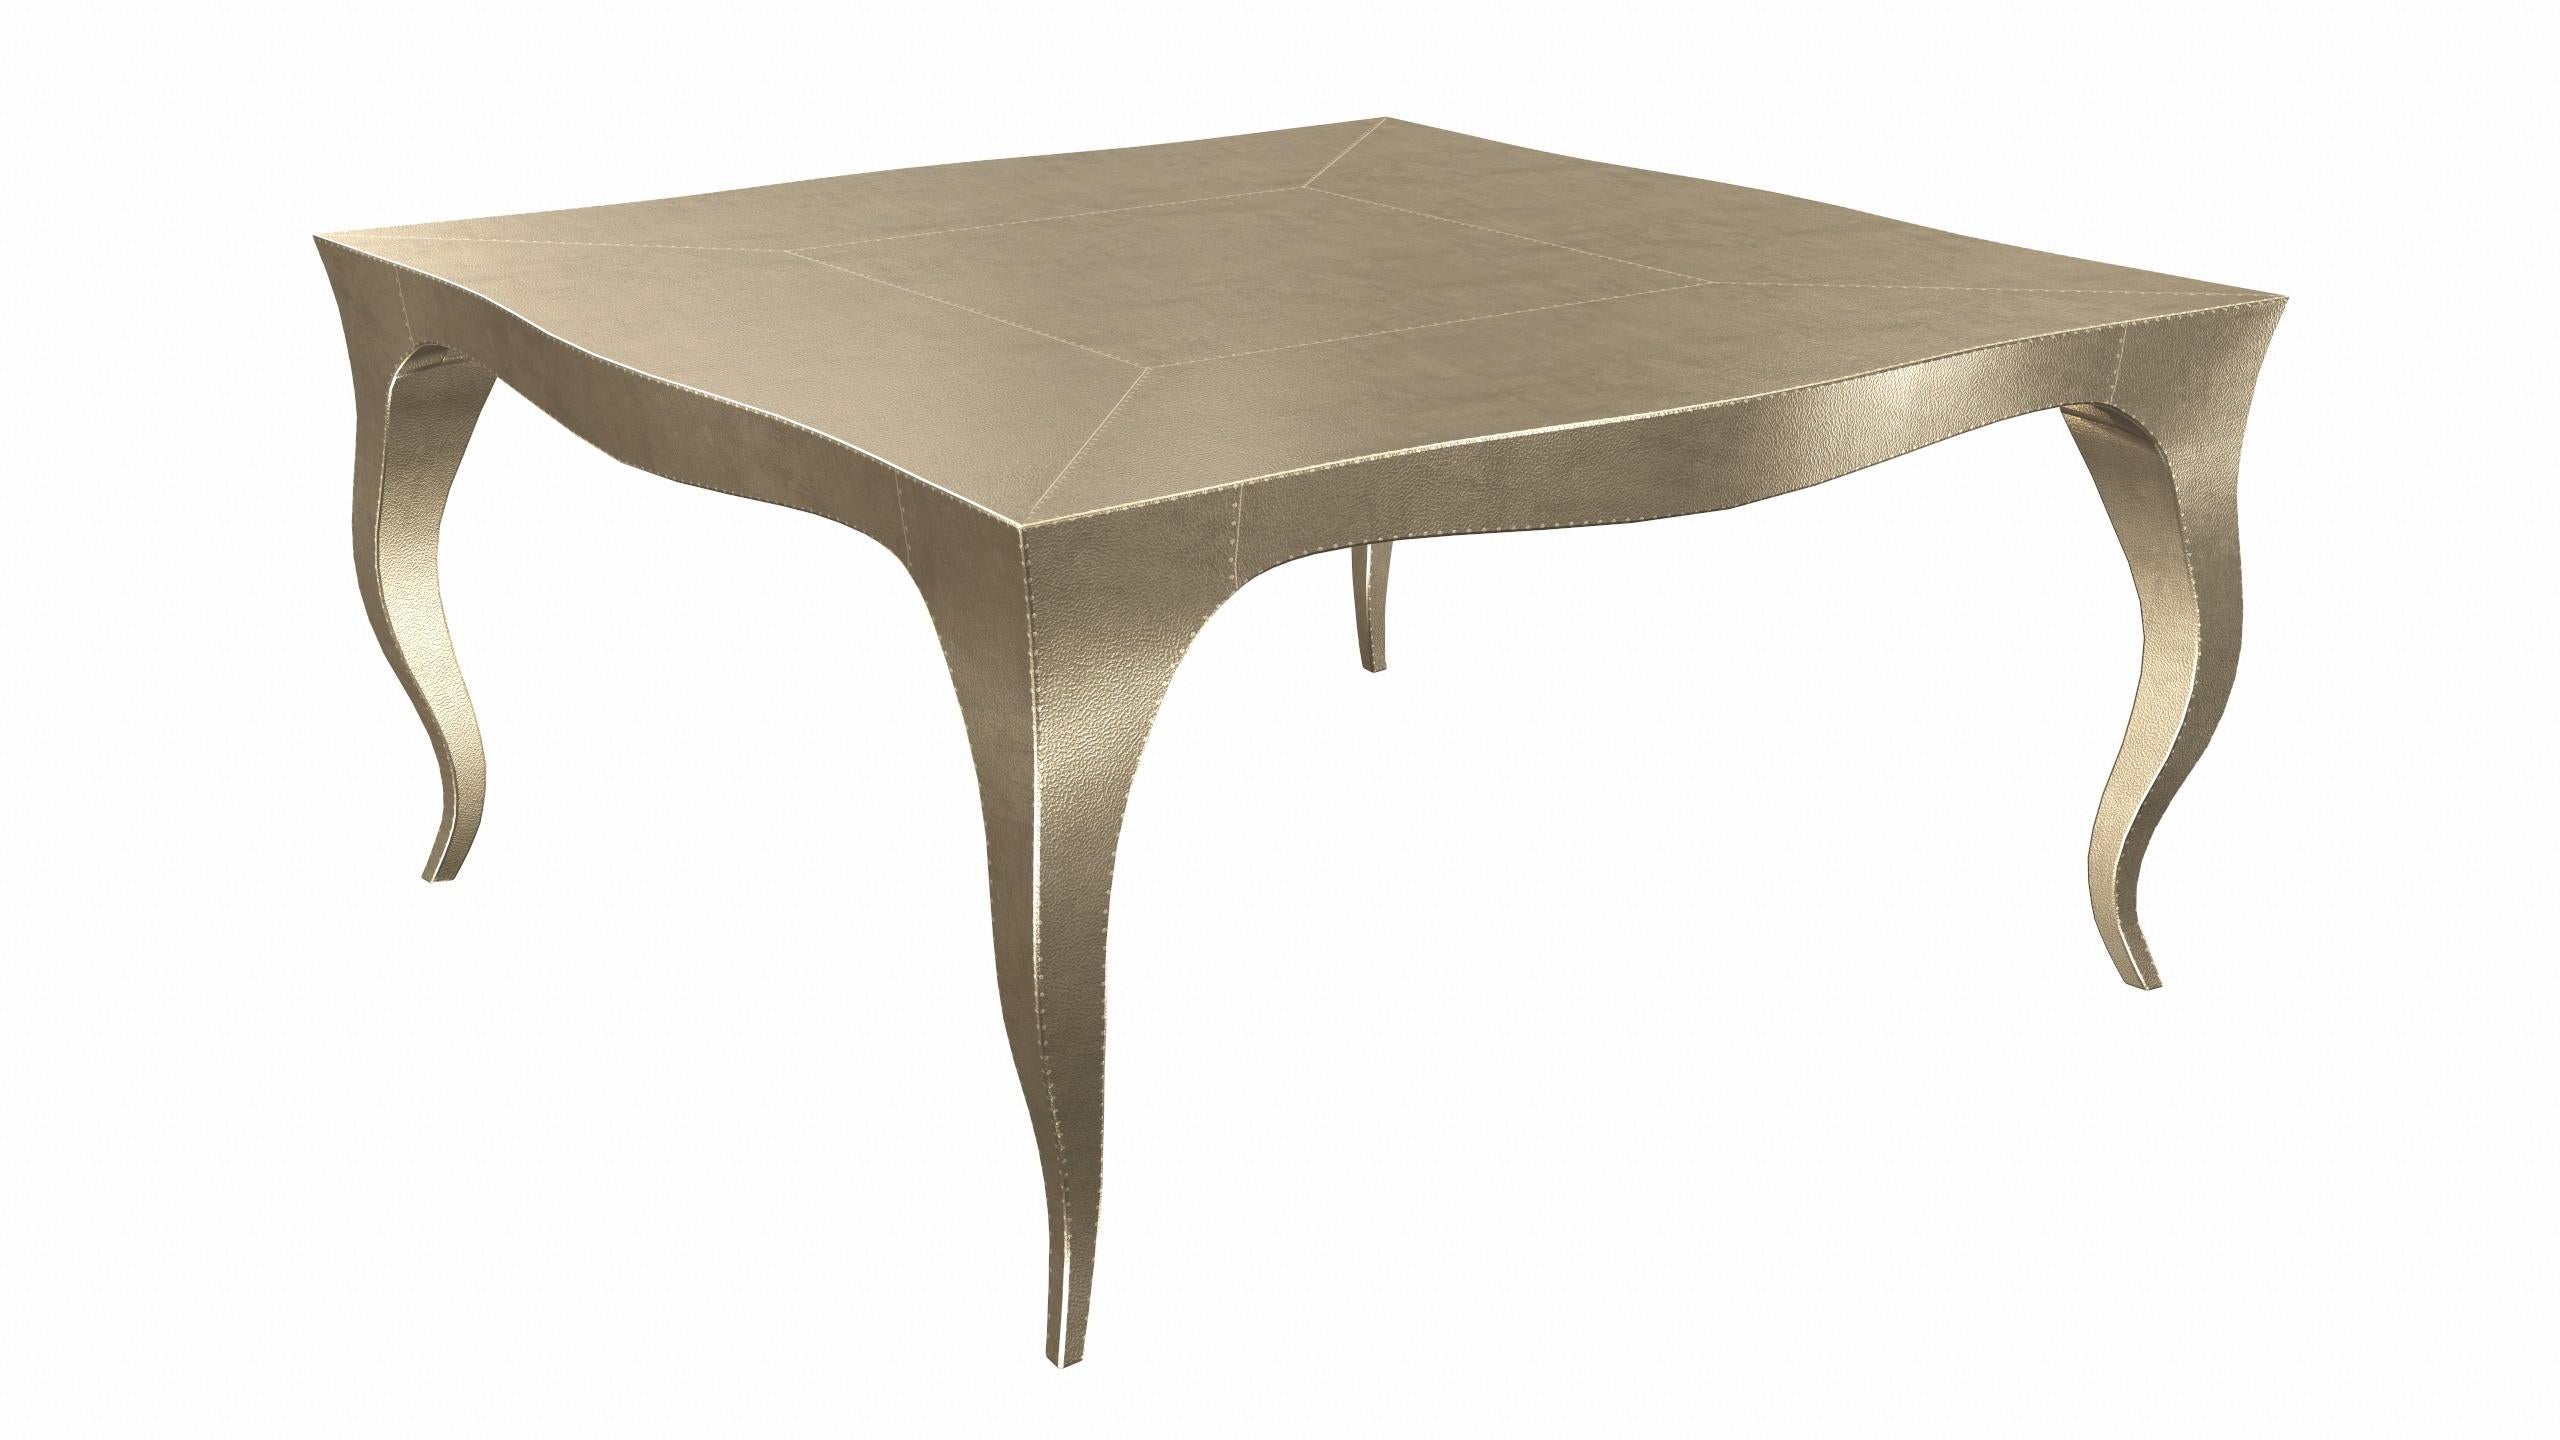 Contemporary Louise Art Deco Nesting Tables Fine Hammered Brass 18.5x18.5x10 inch by Paul M For Sale